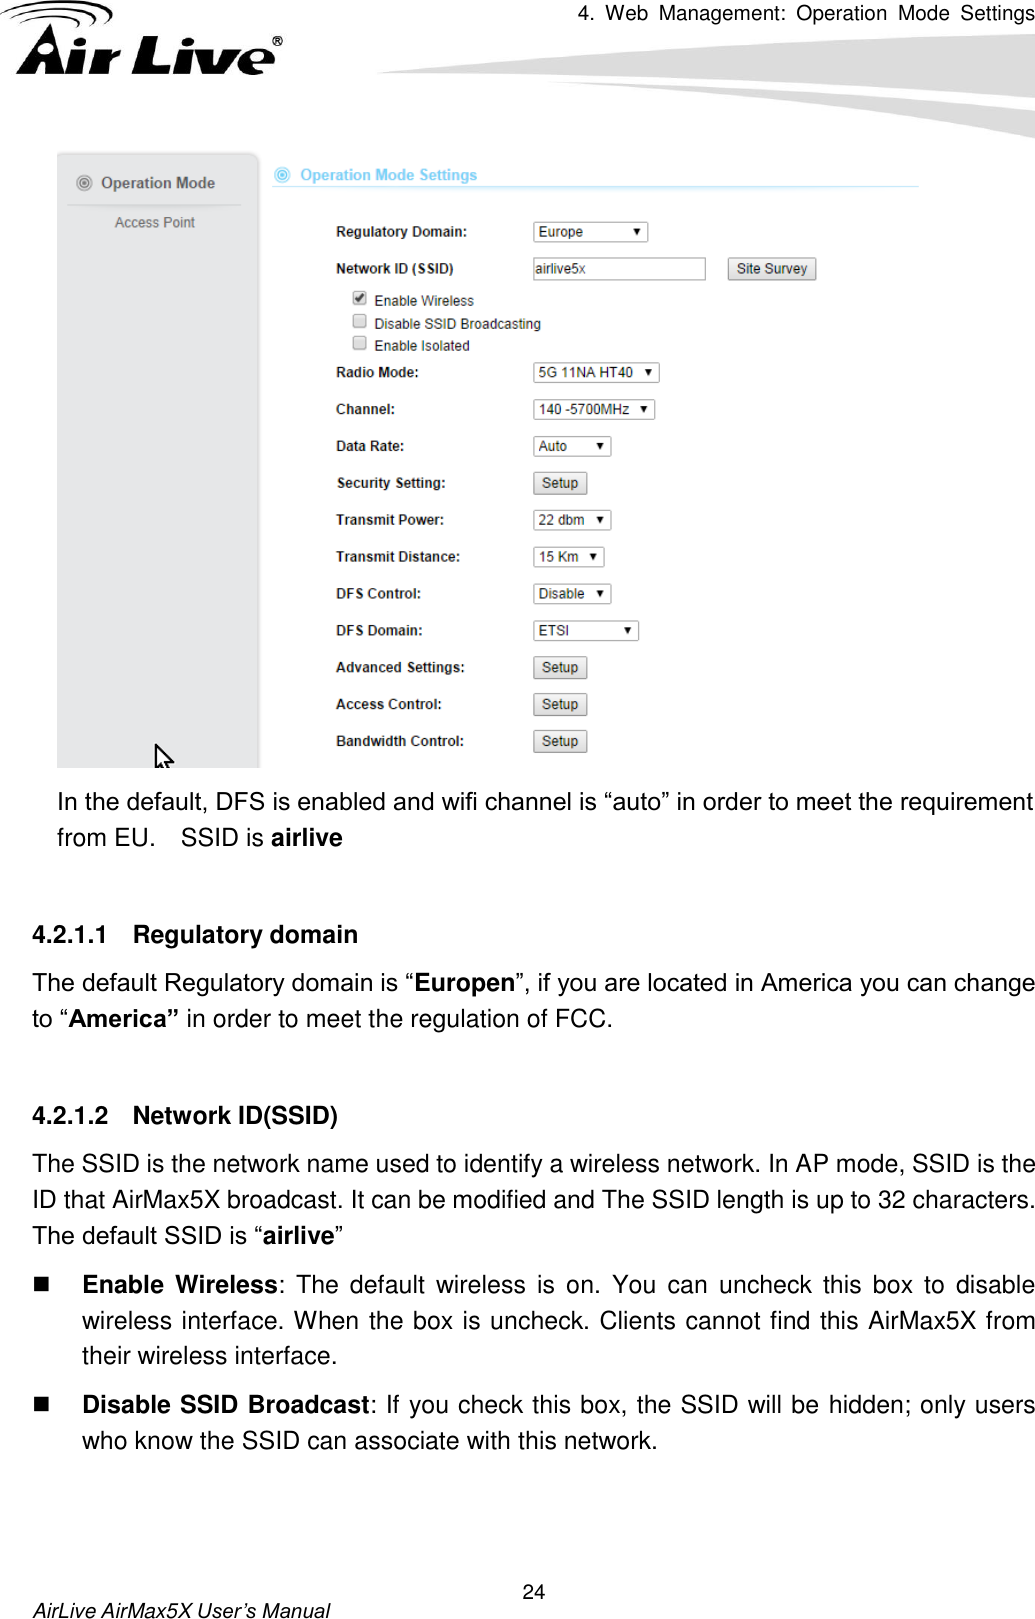 4.  Web  Management:  Operation  Mode  Settings   AirLive AirMax5X User’s Manual 24  In the default, DFS is enabled and wifi channel is “auto” in order to meet the requirement from EU.    SSID is airlive  4.2.1.1  Regulatory domain The default Regulatory domain is “Europen”, if you are located in America you can change to “America” in order to meet the regulation of FCC.  4.2.1.2  Network ID(SSID) The SSID is the network name used to identify a wireless network. In AP mode, SSID is the ID that AirMax5X broadcast. It can be modified and The SSID length is up to 32 characters. The default SSID is “airlive”  Enable  Wireless:  The  default  wireless  is  on.  You  can  uncheck  this box to disable wireless interface. When the box is uncheck. Clients cannot find this AirMax5X from their wireless interface.  Disable SSID Broadcast: If you check this box, the SSID will be hidden; only users who know the SSID can associate with this network.   